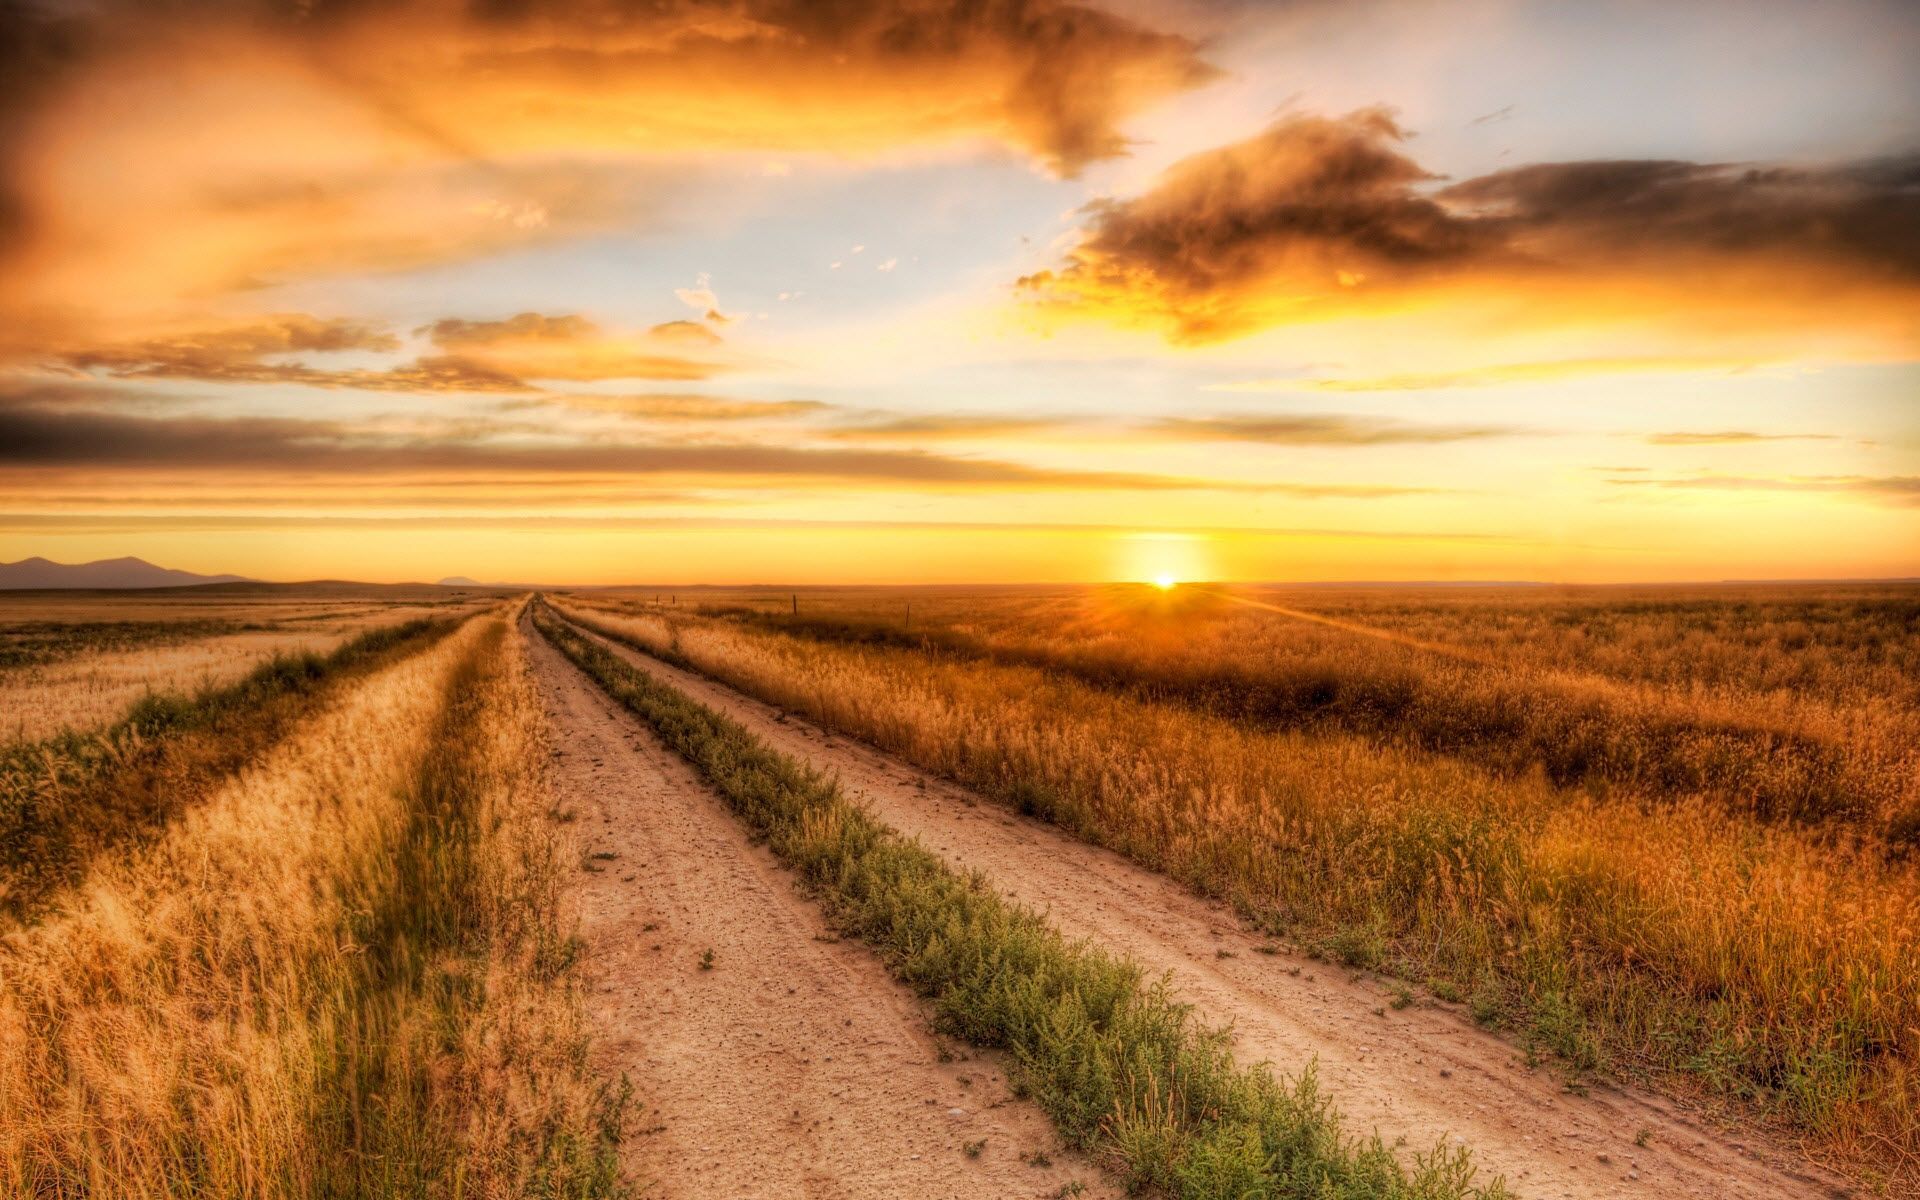 Dirt Road Sunset Wallpaper Background For PC - Global Orphan Care